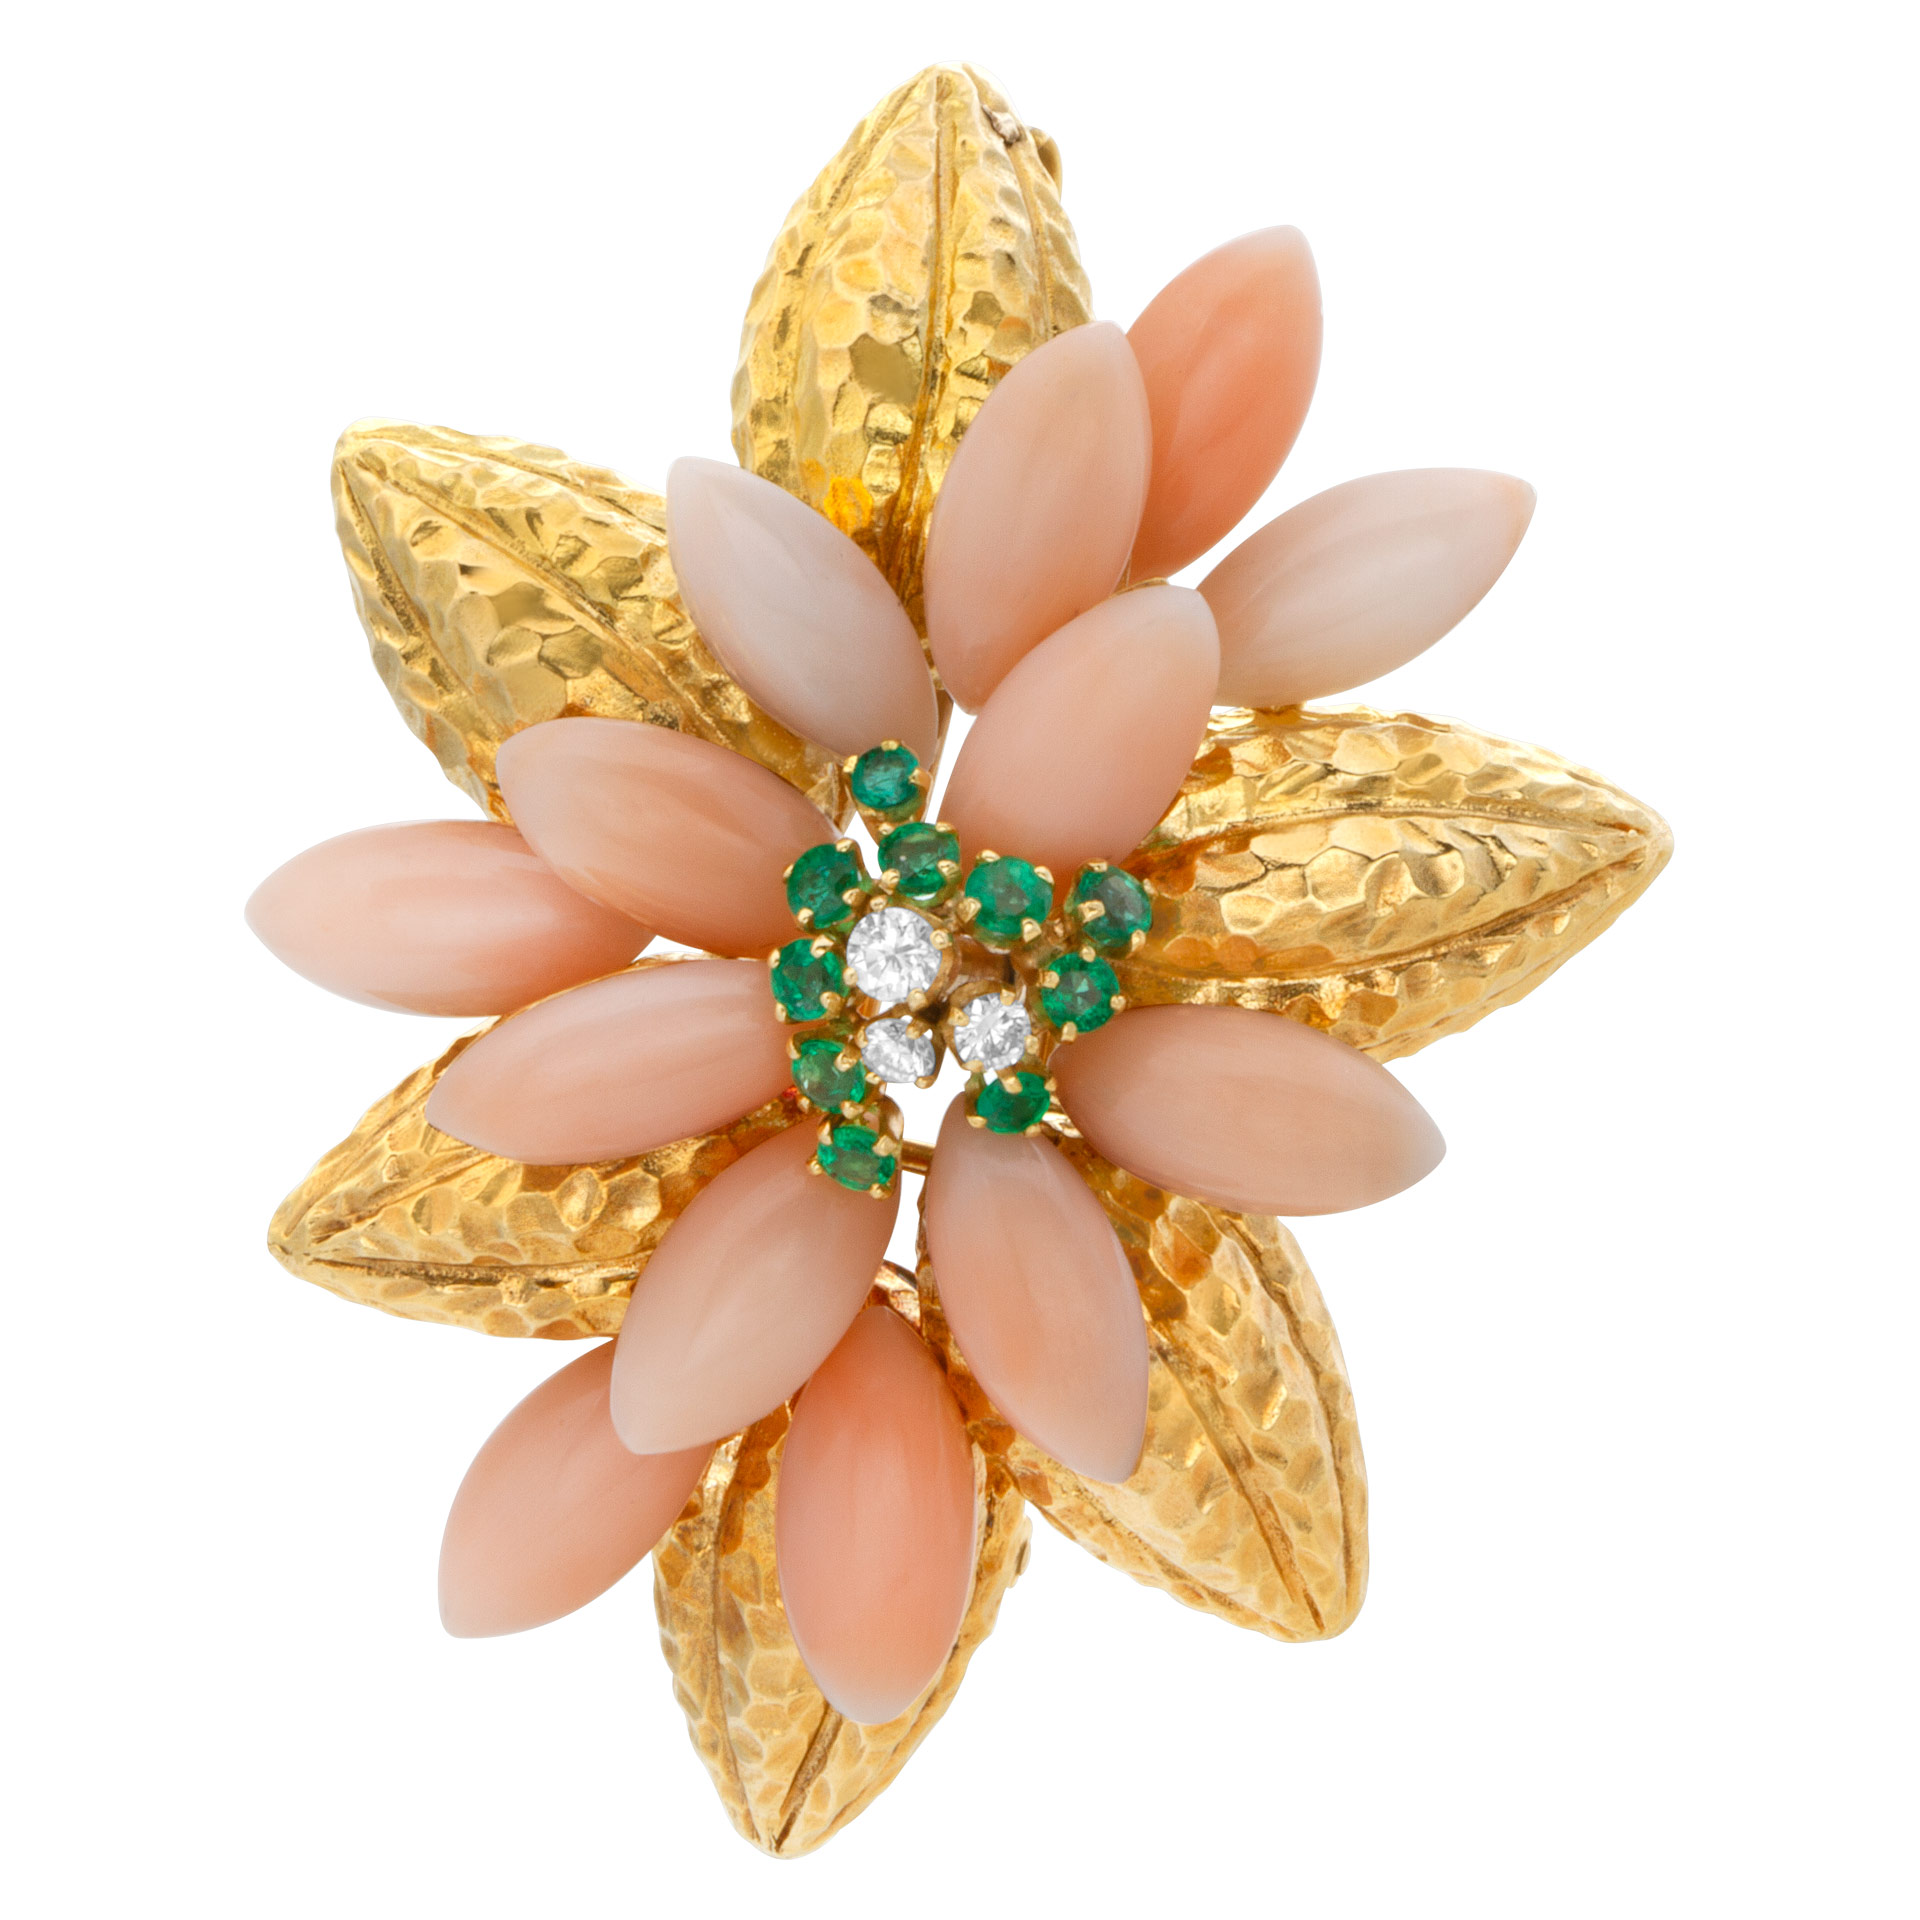 Flower brooch/pendant in 18k yellow gold with center diamonds and emerald accents image 1